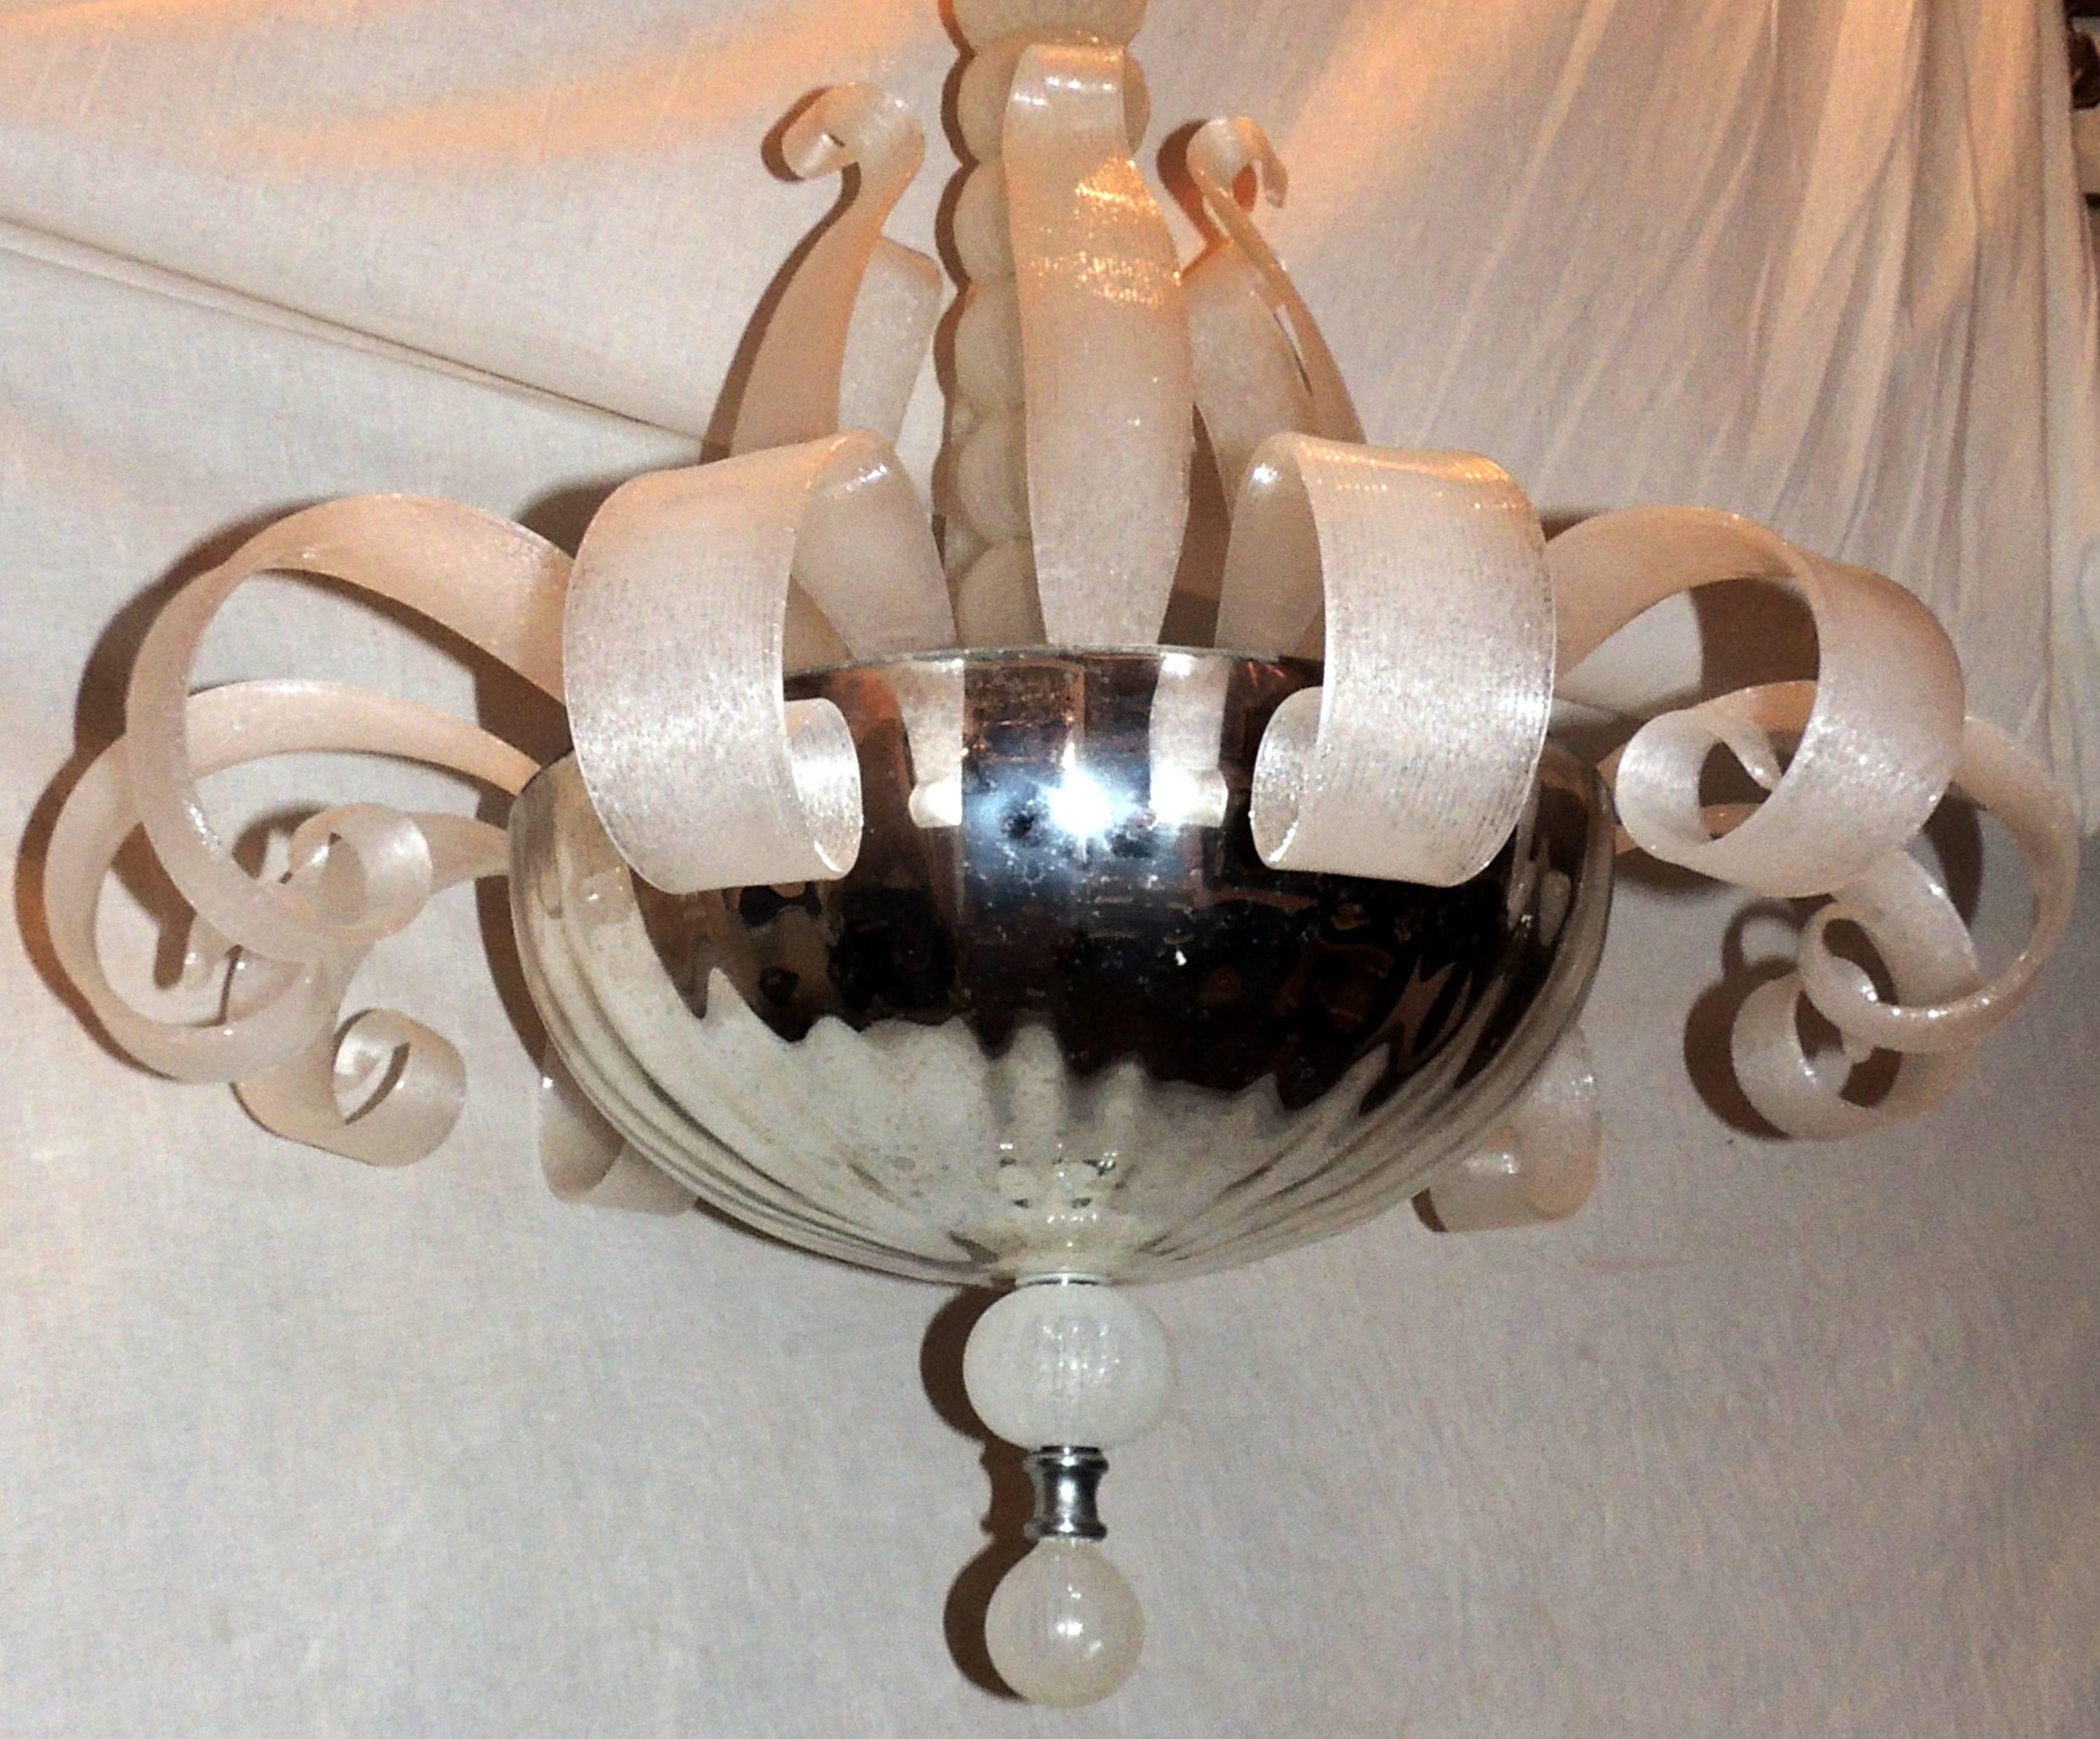 A wonderful Mid-Century Modern Venetian blown glass transitional fixture vintage leaf and ball form center with four Edison lights inside with 75 watts per socket.